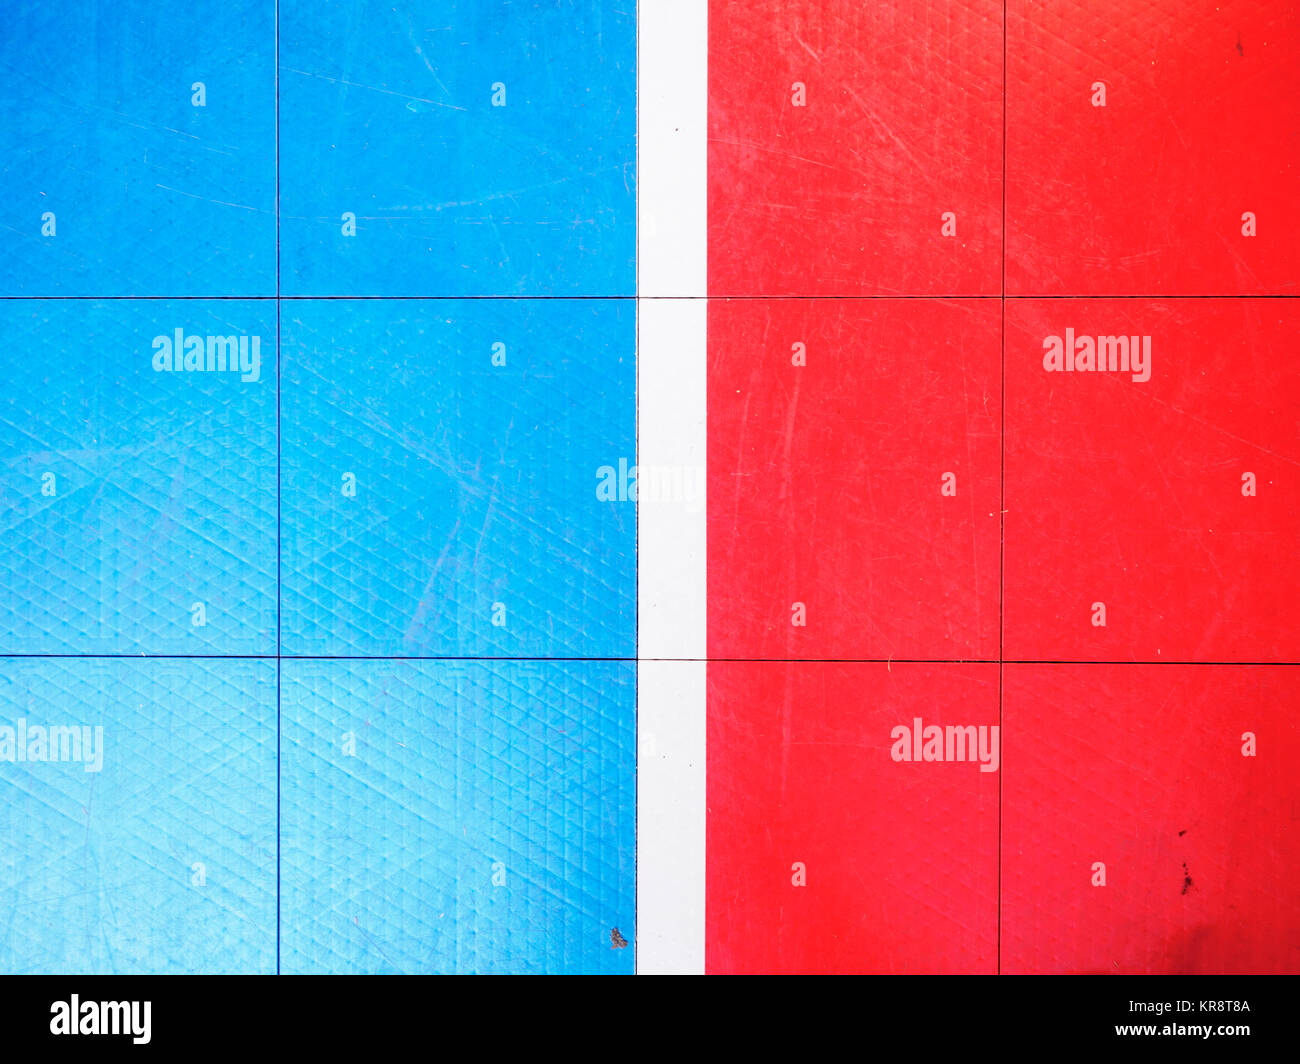 Red and blue tiled floor of basketball court Stock Photo